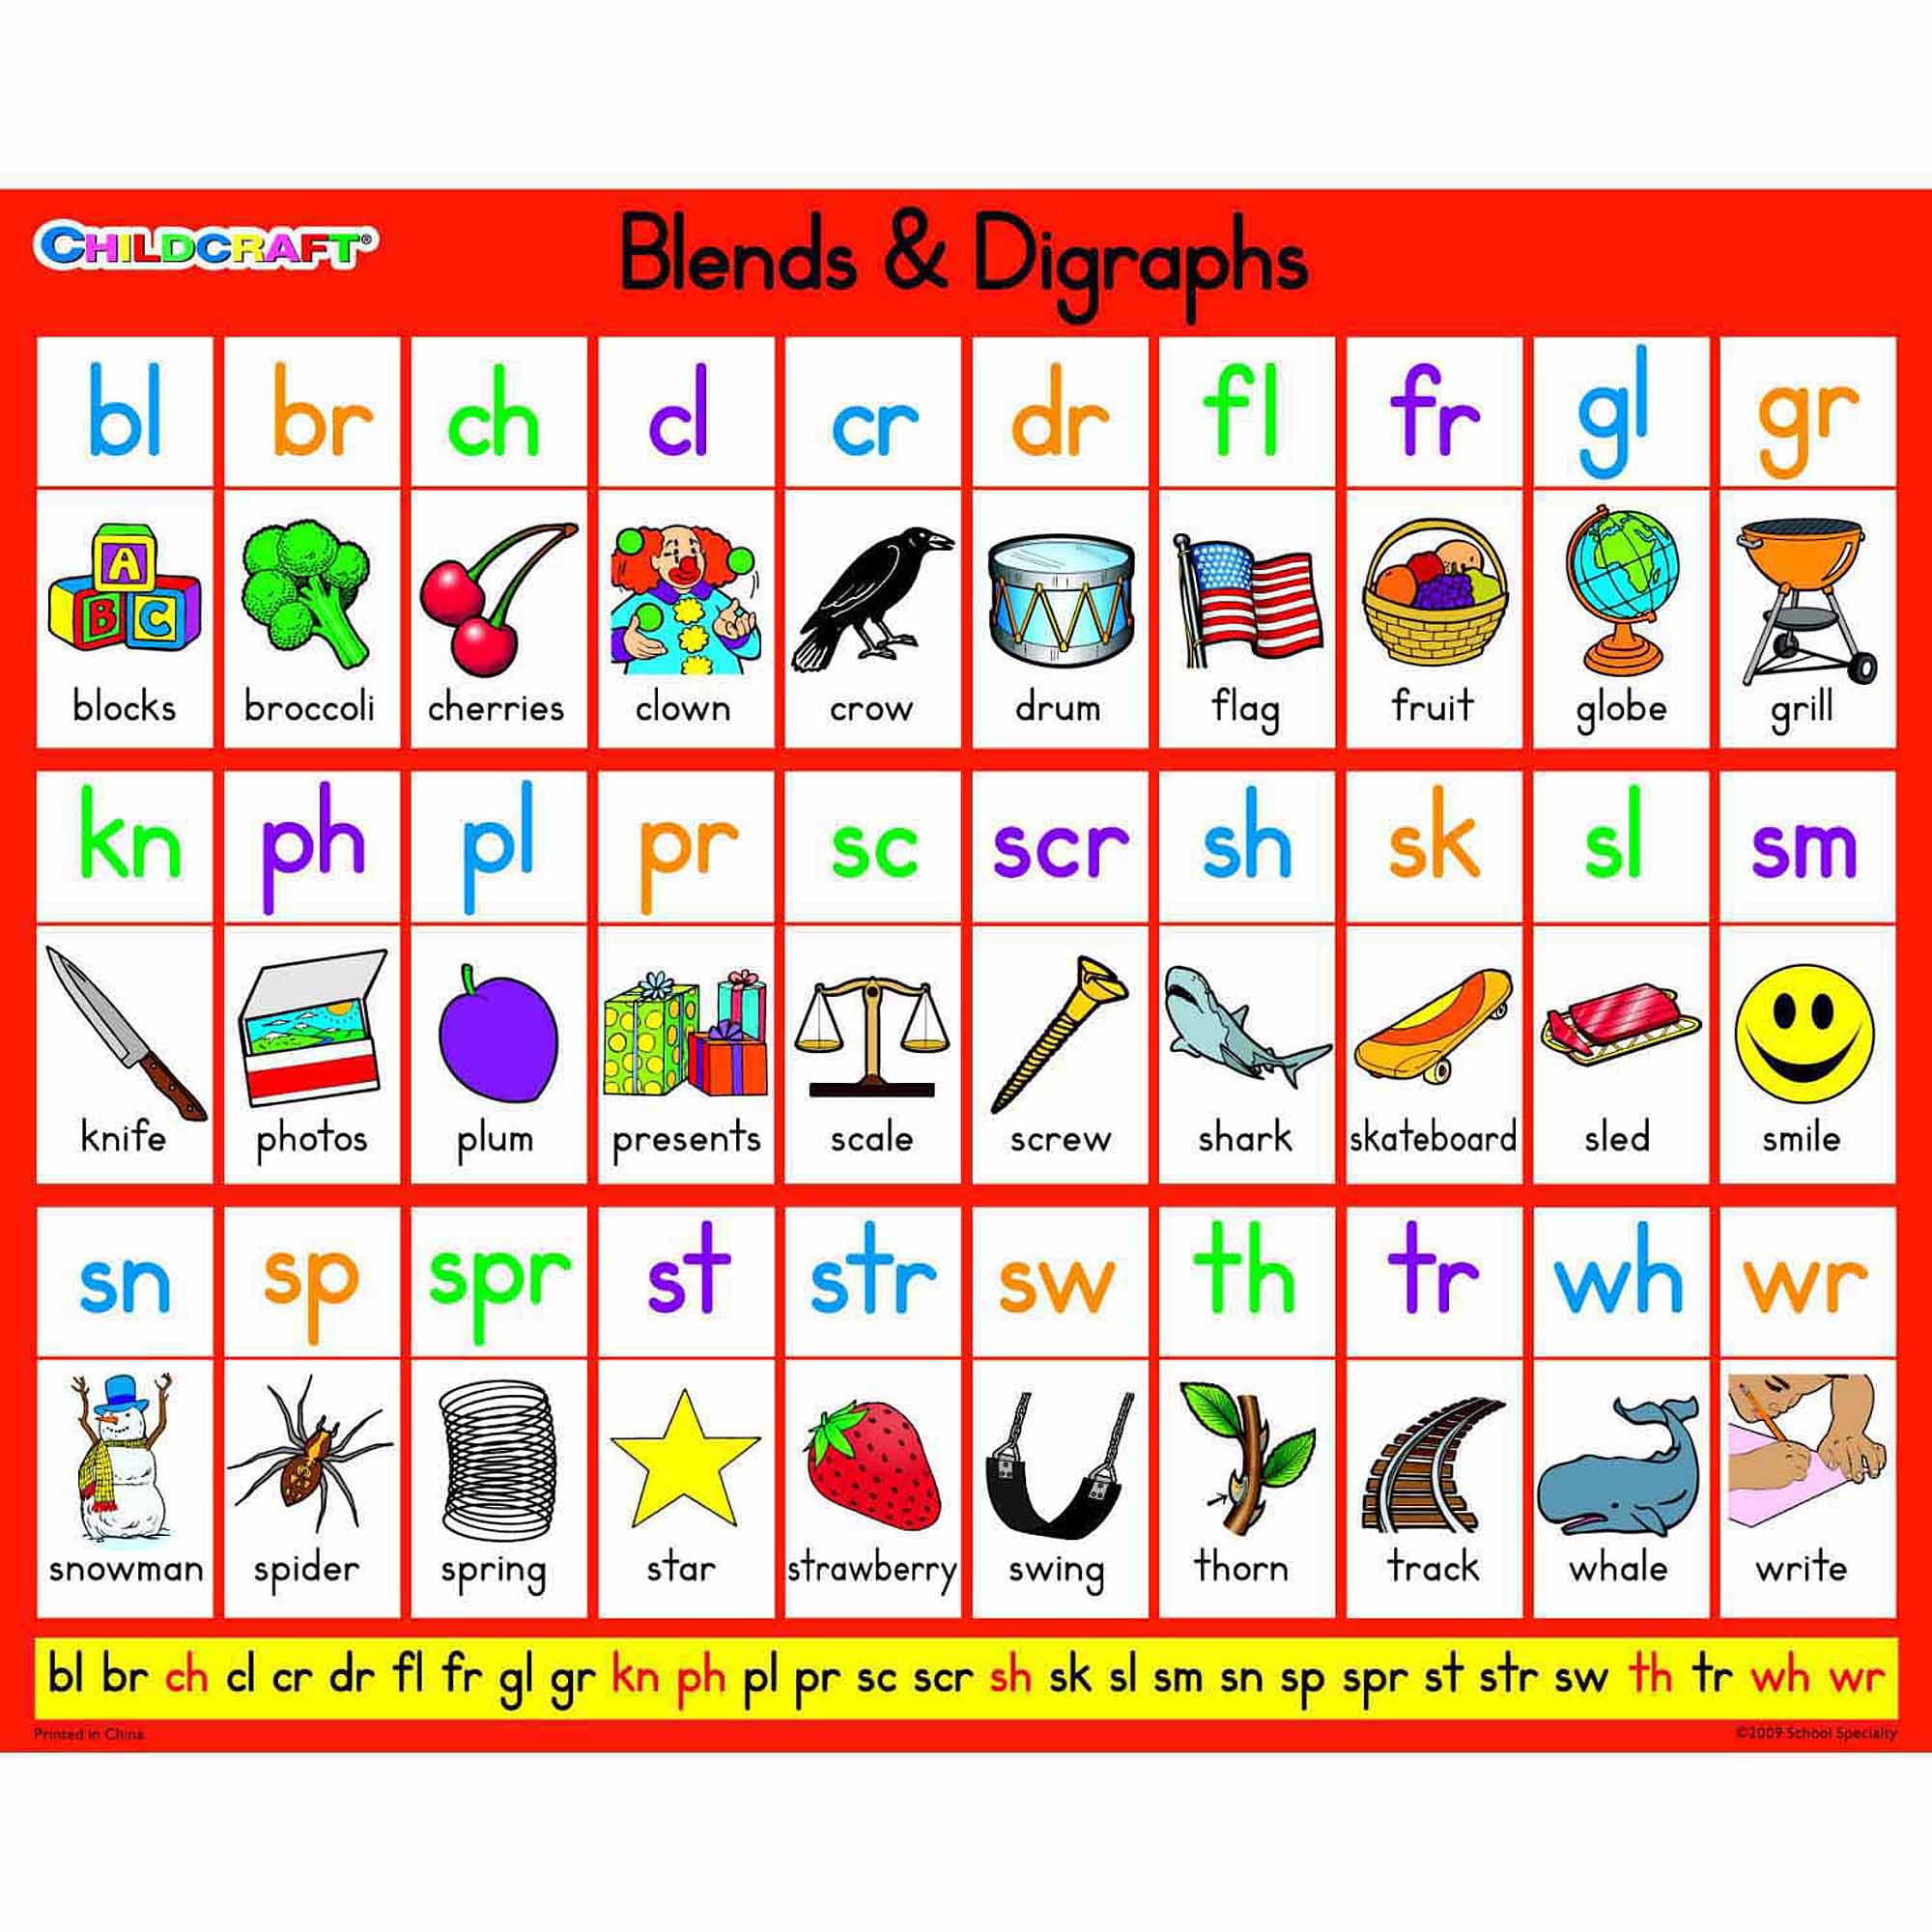 blends-and-digraphs-poster-a-shit-go1